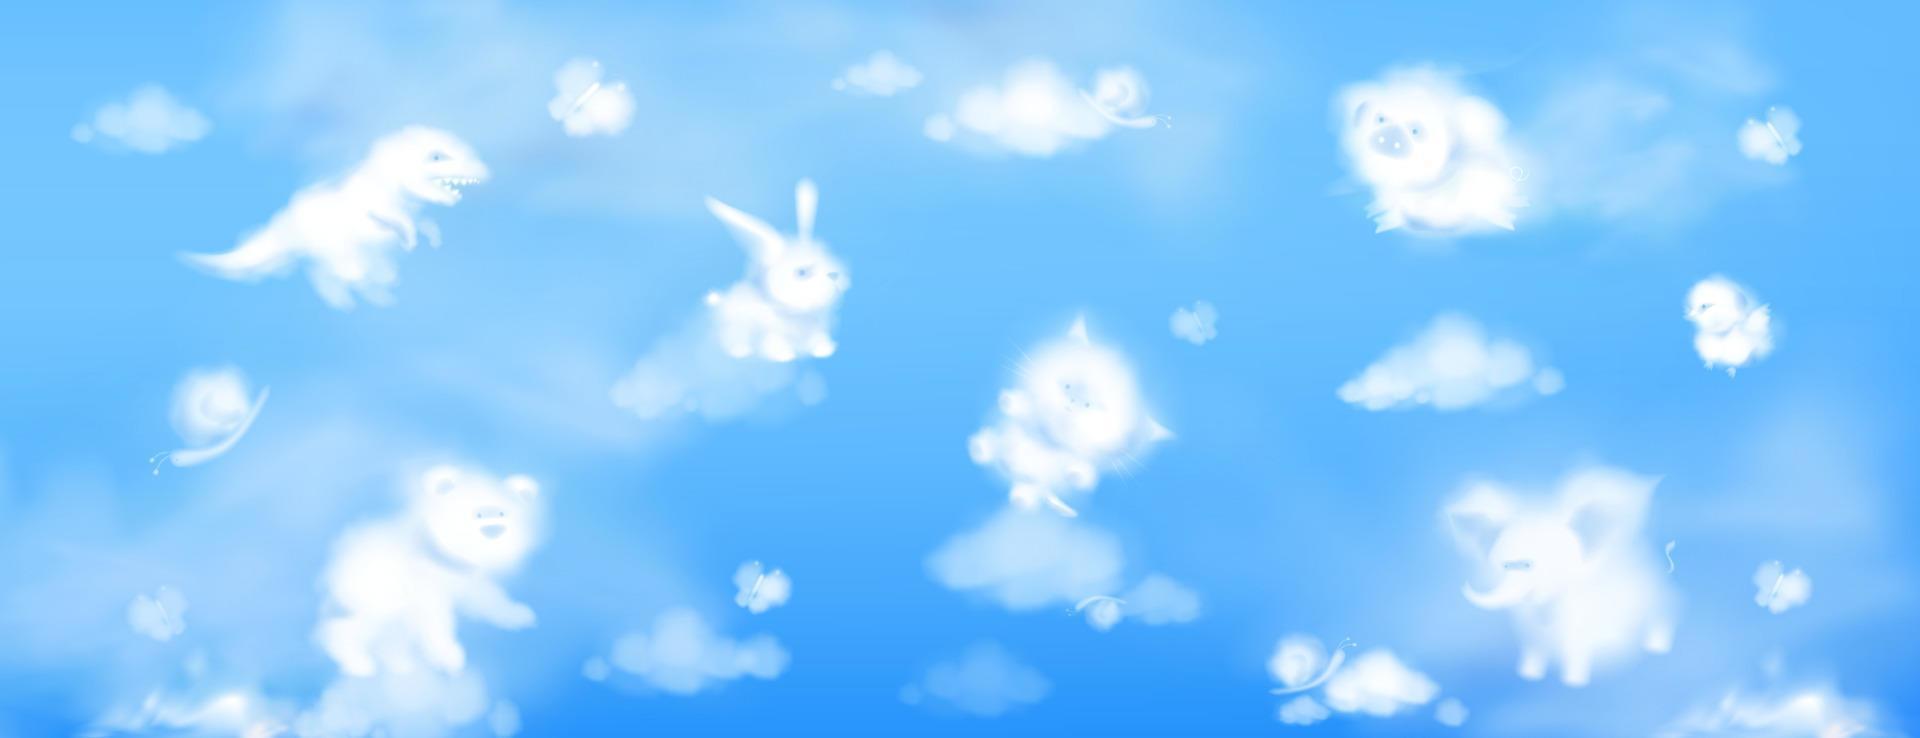 White clouds in shape of cute animals in sky vector